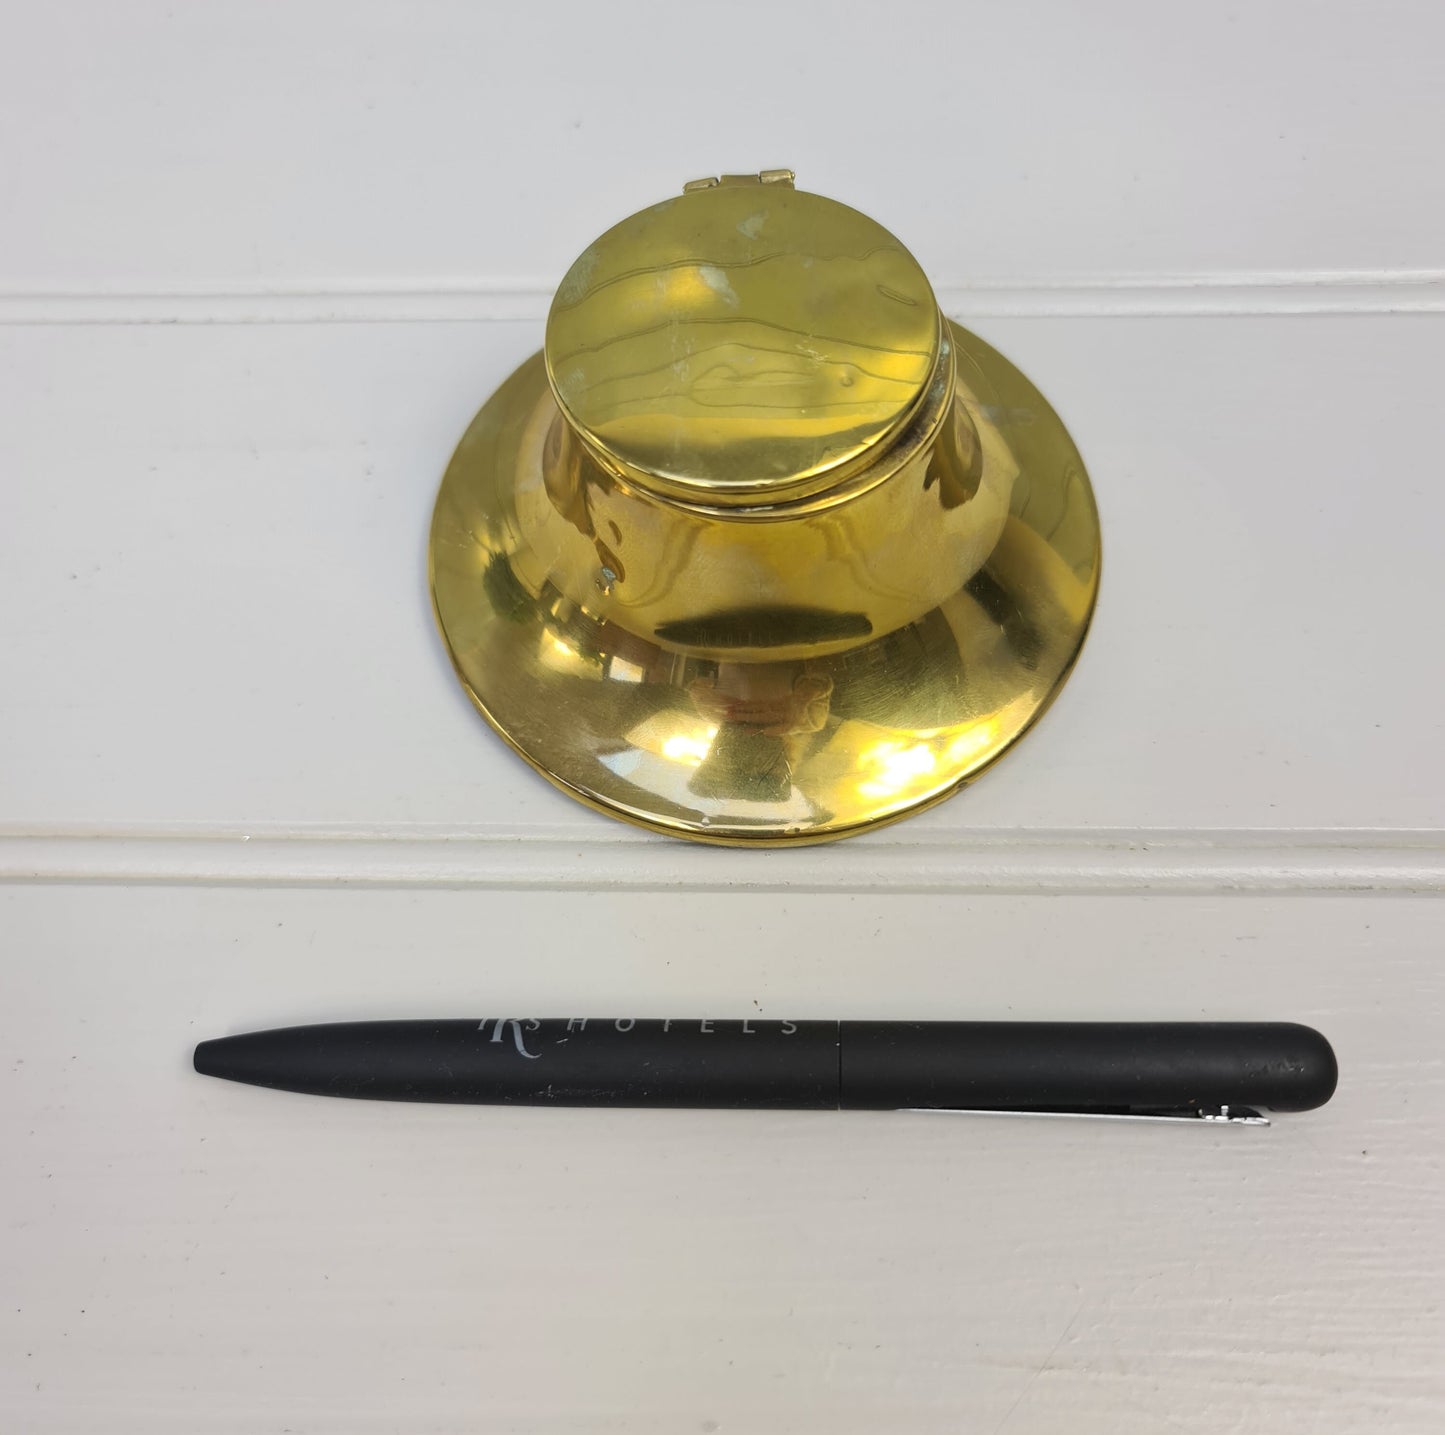 Vintage French brass retro inkwell with original glass insert Round inkstand with lid